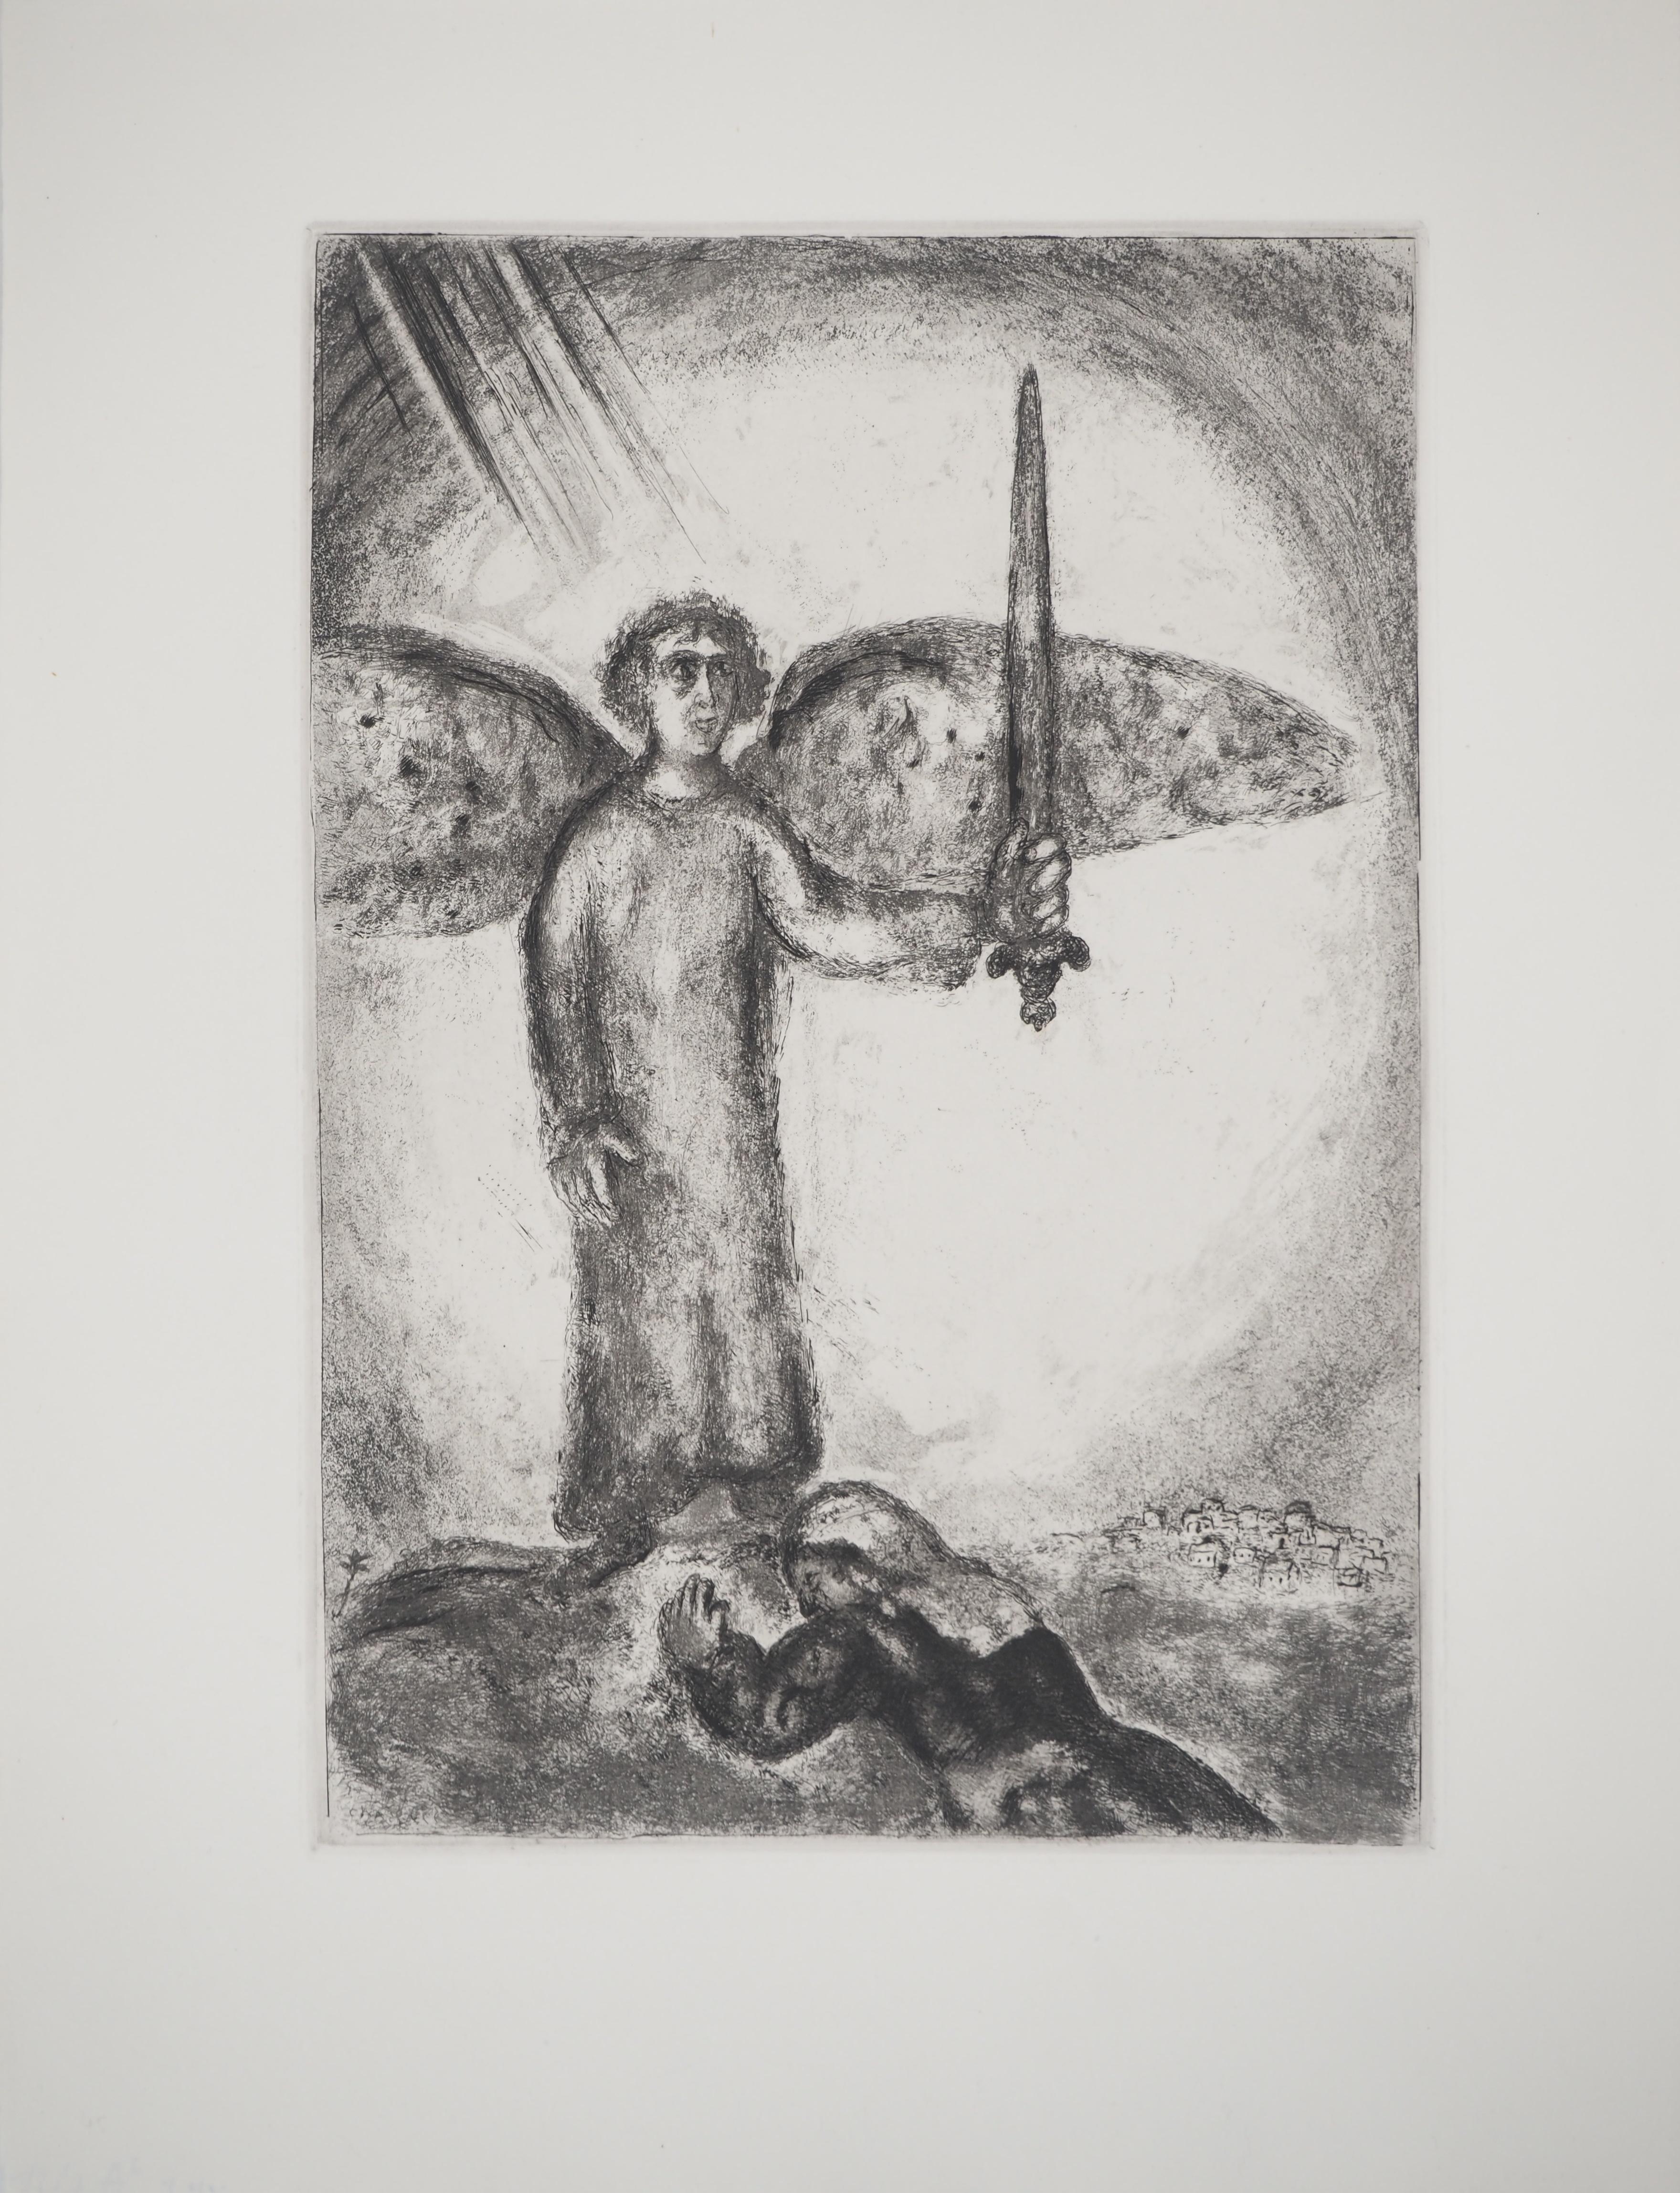 Bible : Joshua with the angel with the sword, 1939 - eau-forte originale